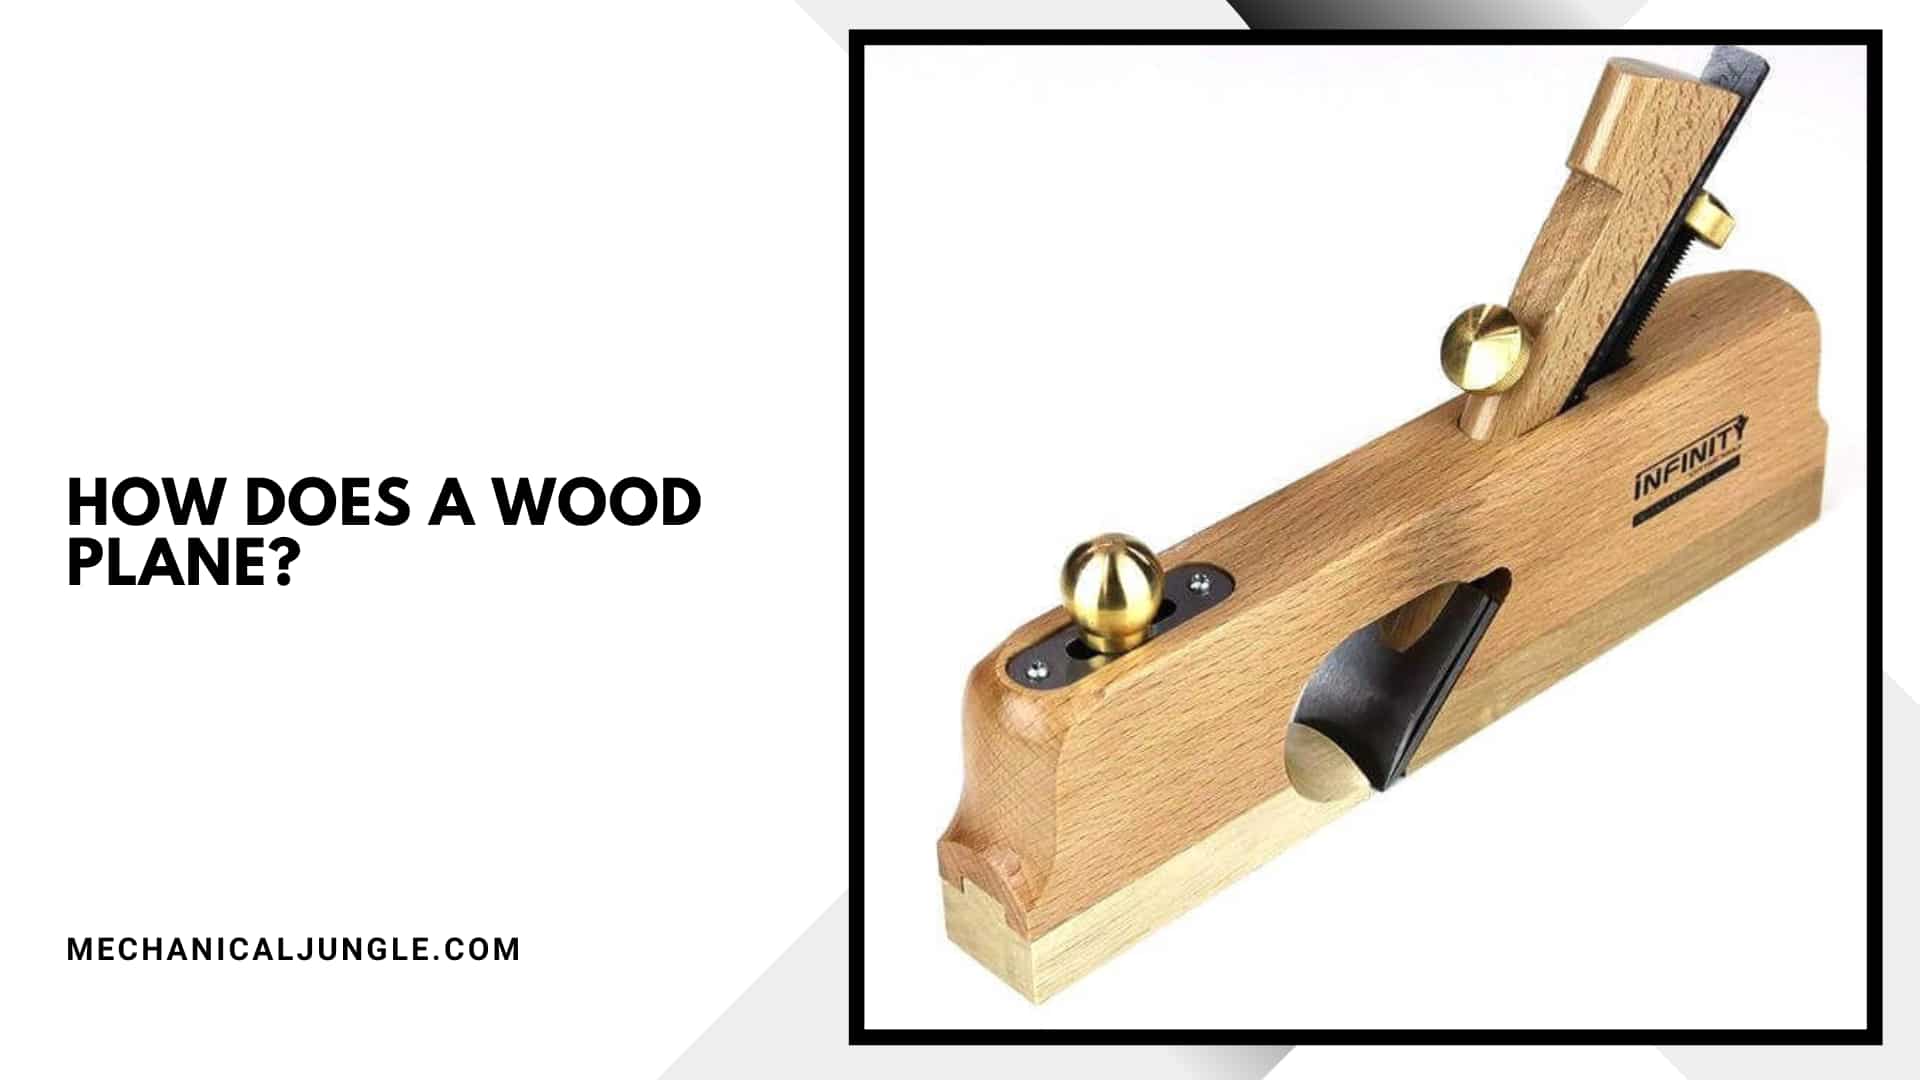 How Does a Wood Plane?